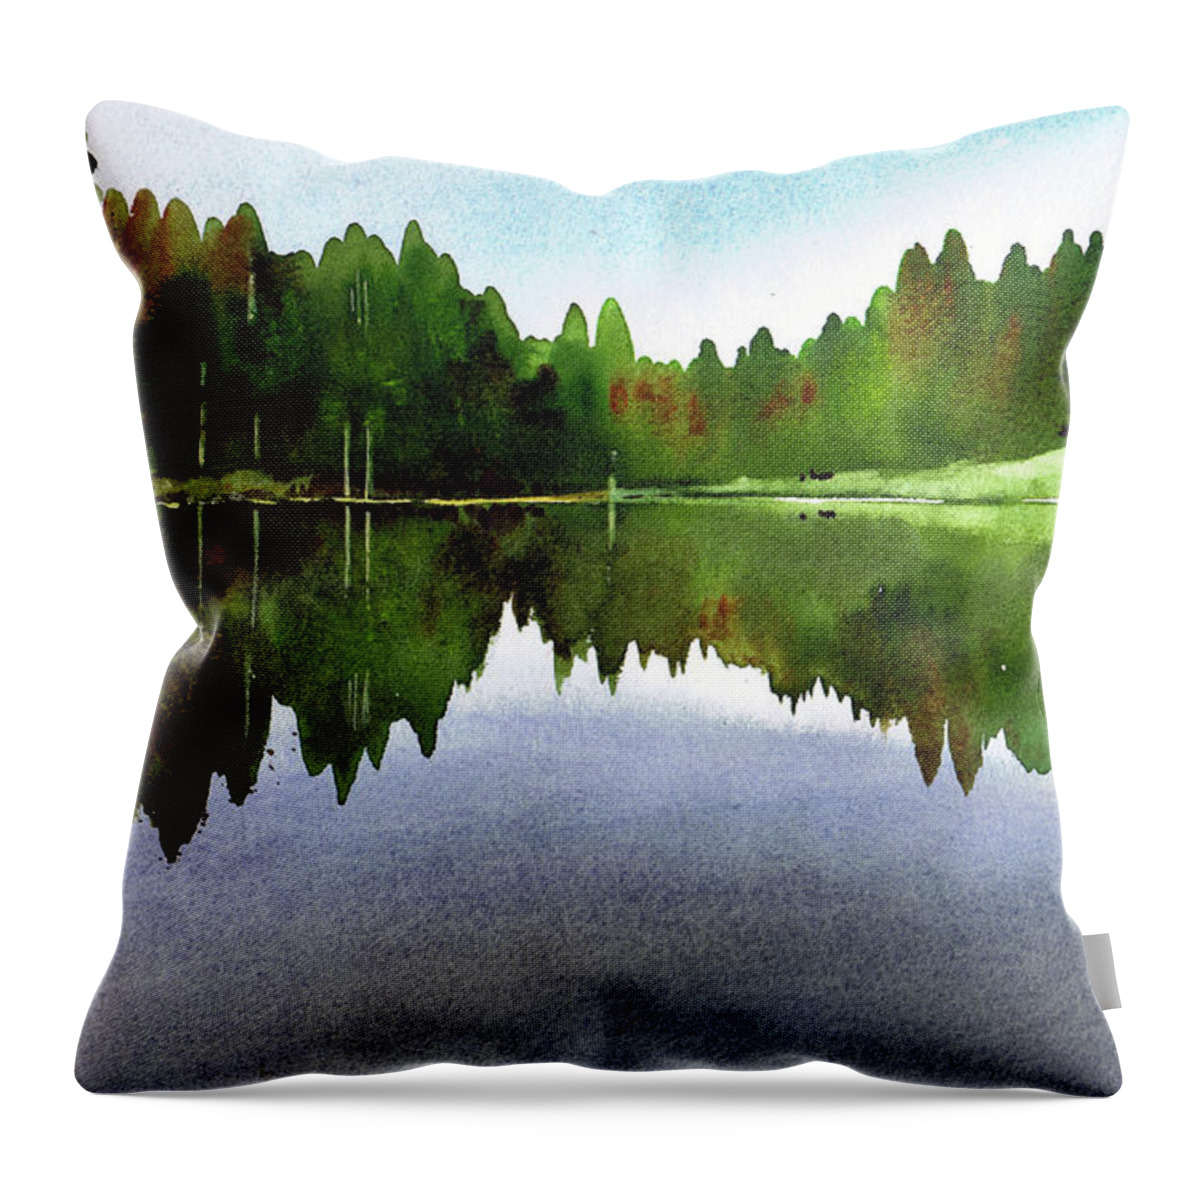 Watercolour Lanndscape Throw Pillow featuring the painting Still Water Tarn Hows by Paul Dene Marlor